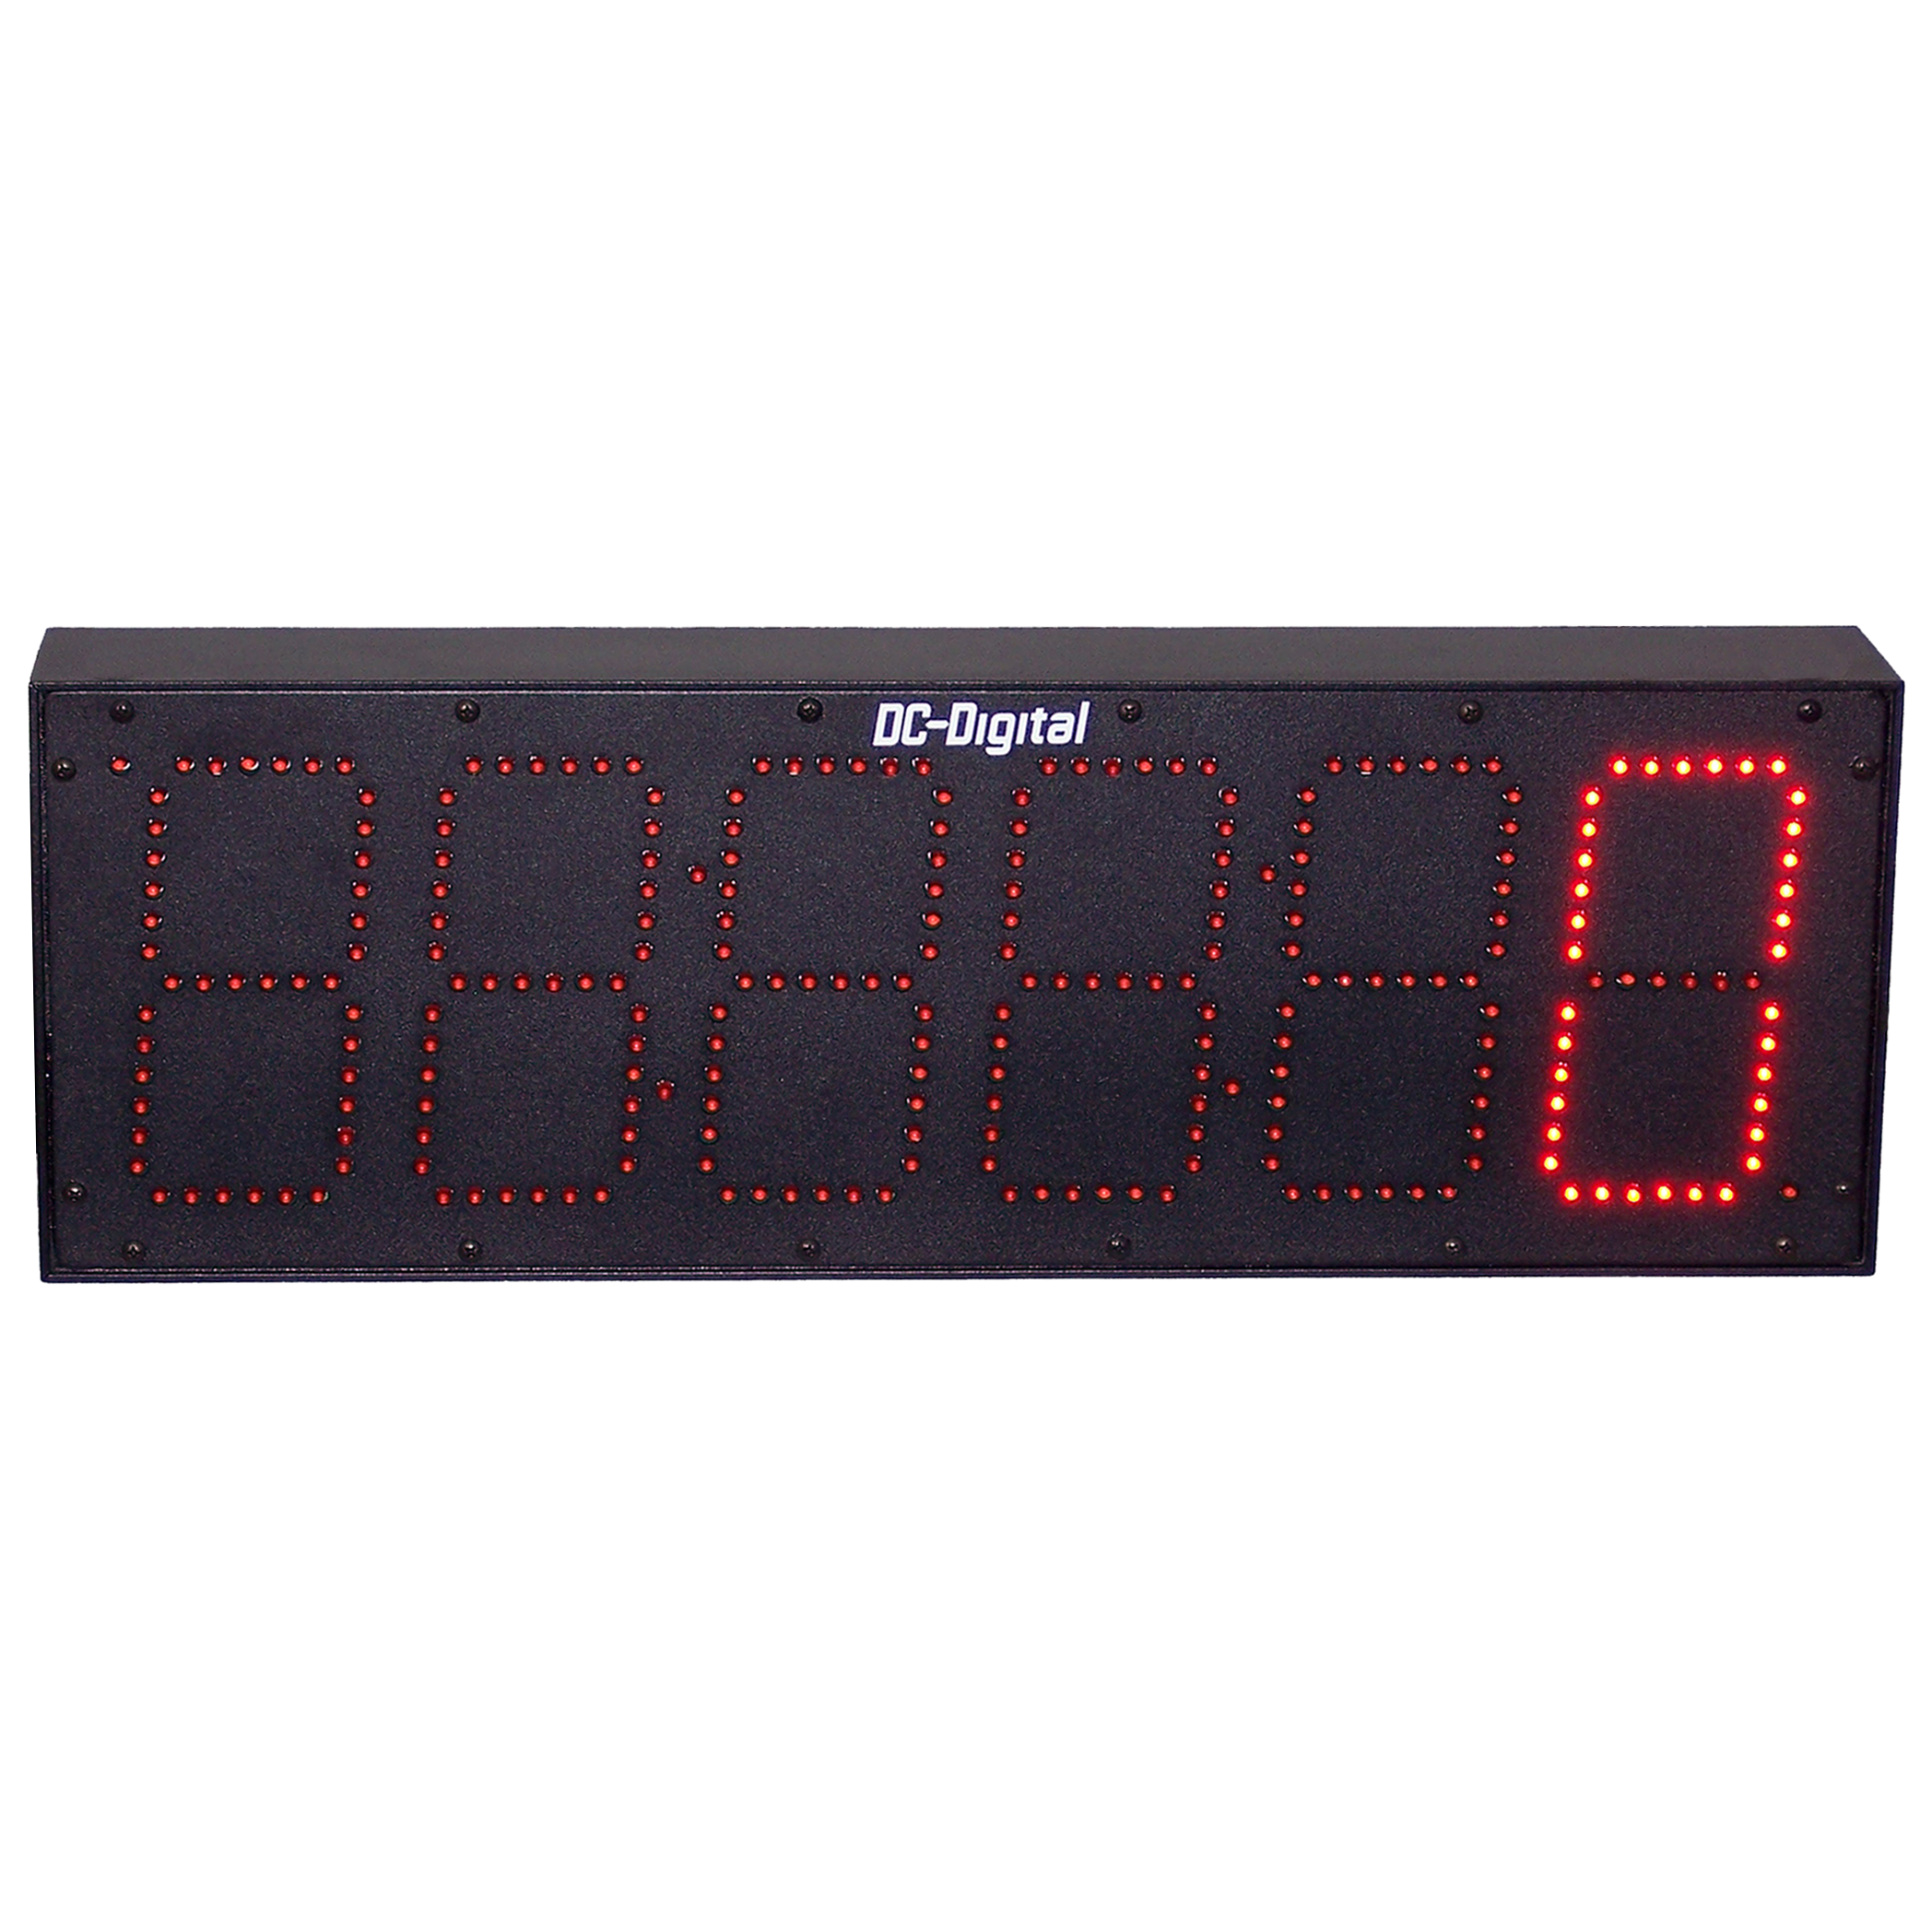 (DC-606C-TERM-IN) 6.0 Inch LED, 6 Digit, Multi-Input Remote Controlled Production Counter that accepts: PLC, Relay, Switch and Sensor Inputs (INDOOR)